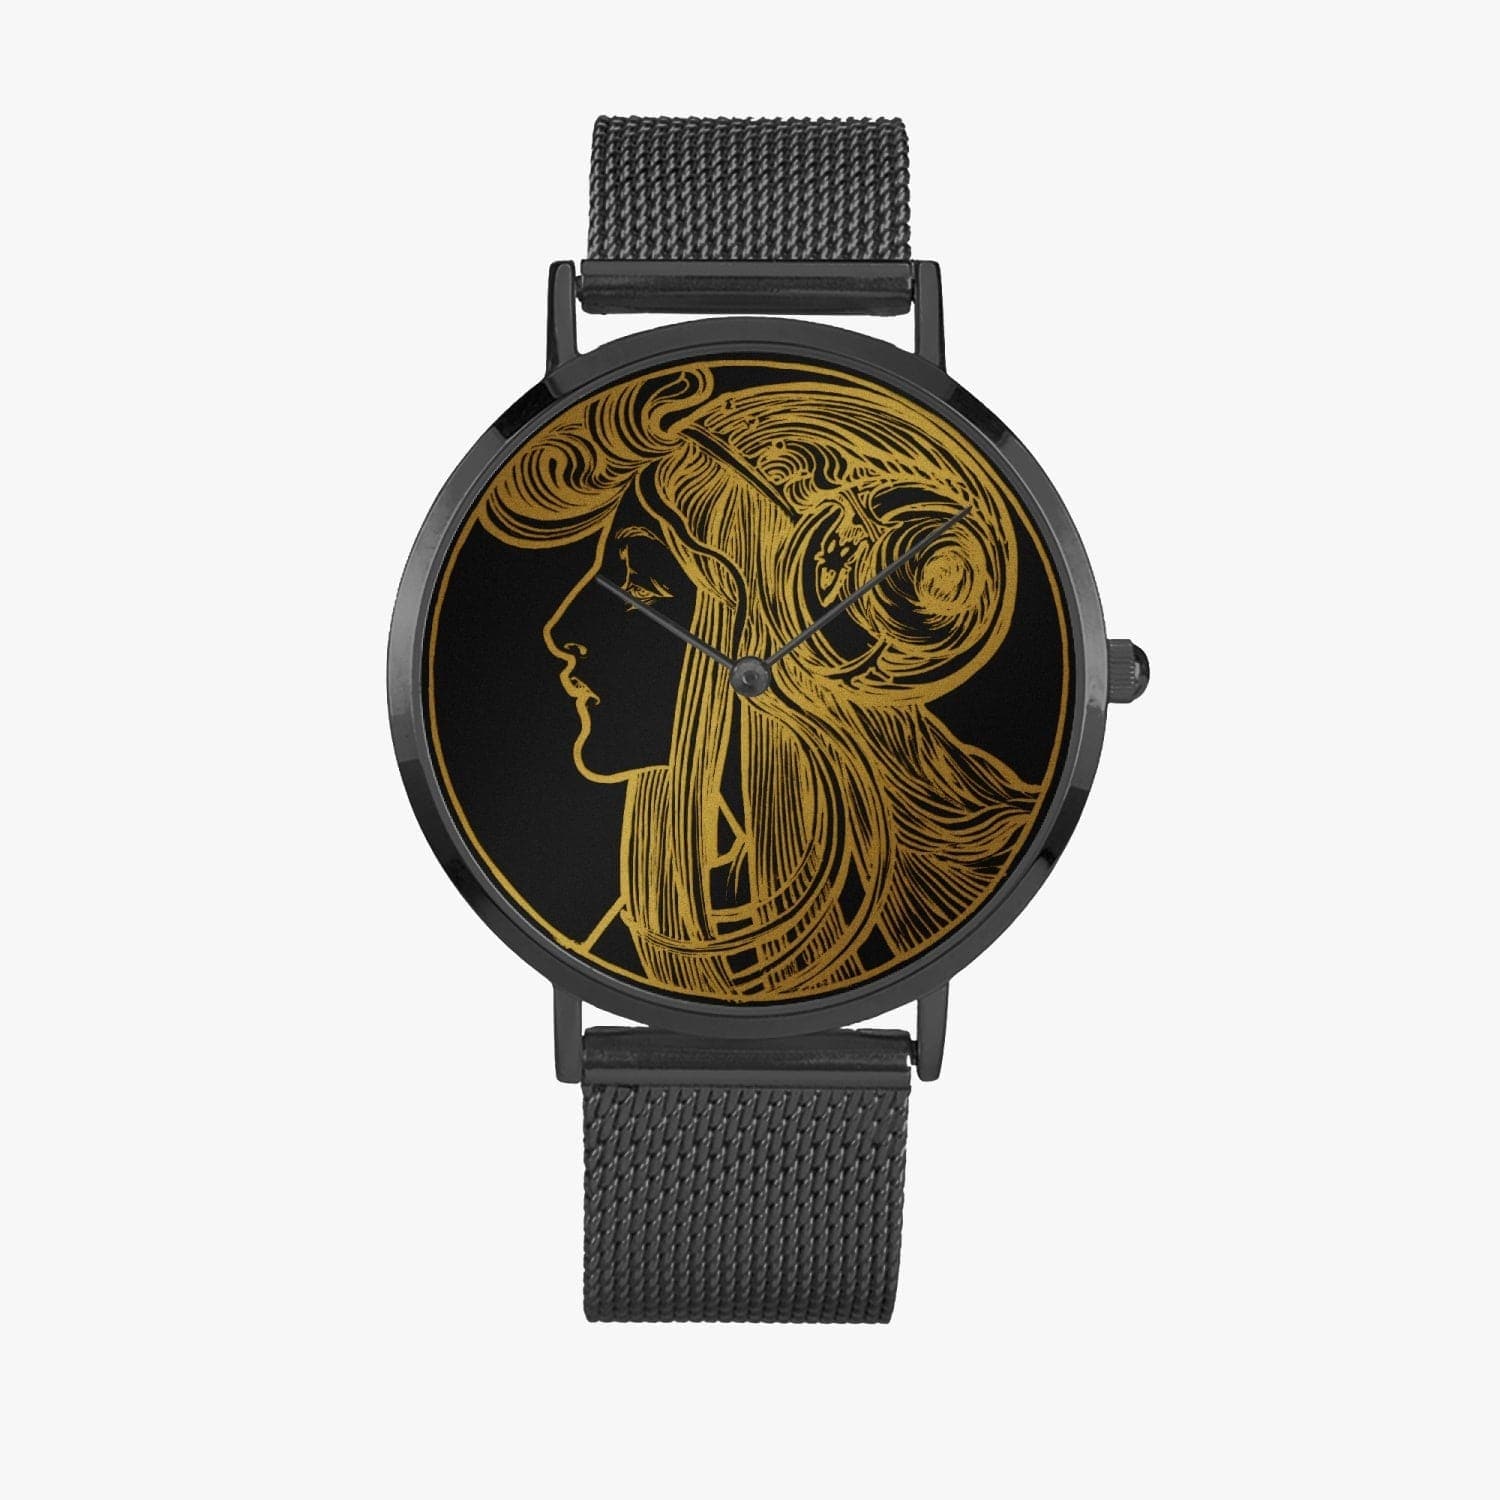 Lady in Gold Art Nouveau Watch. Fashion Ultra-thin Stainless Steel Quartz Watch, by Sensus Studio